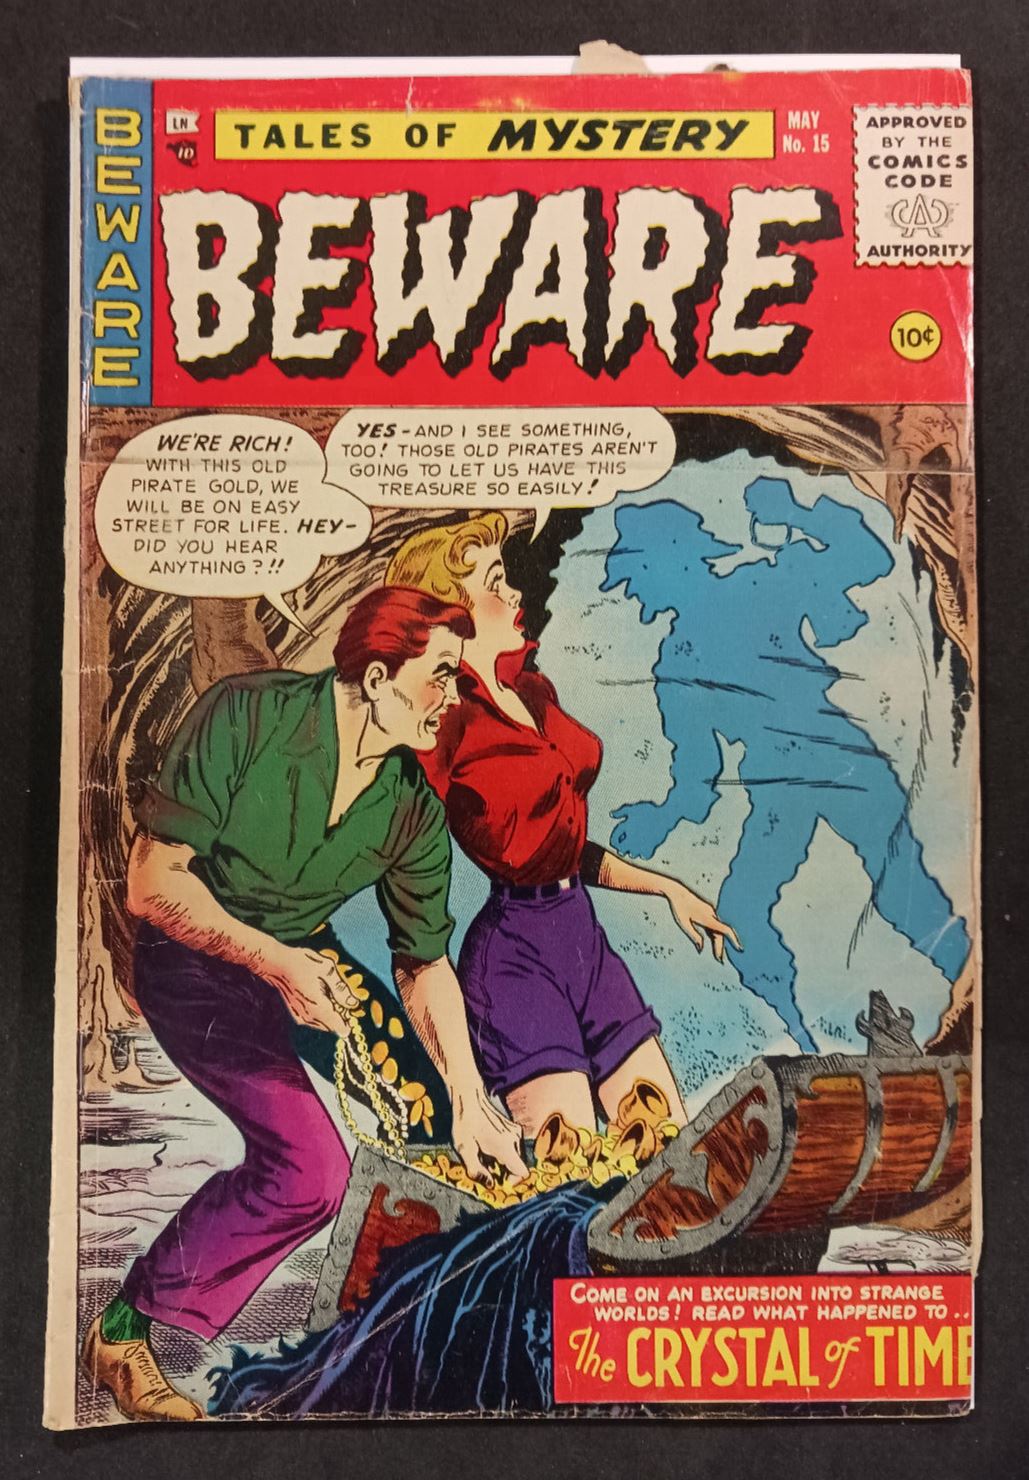 1955 Tales of Mystery Beware No. 15 - Last Issue of the Year.